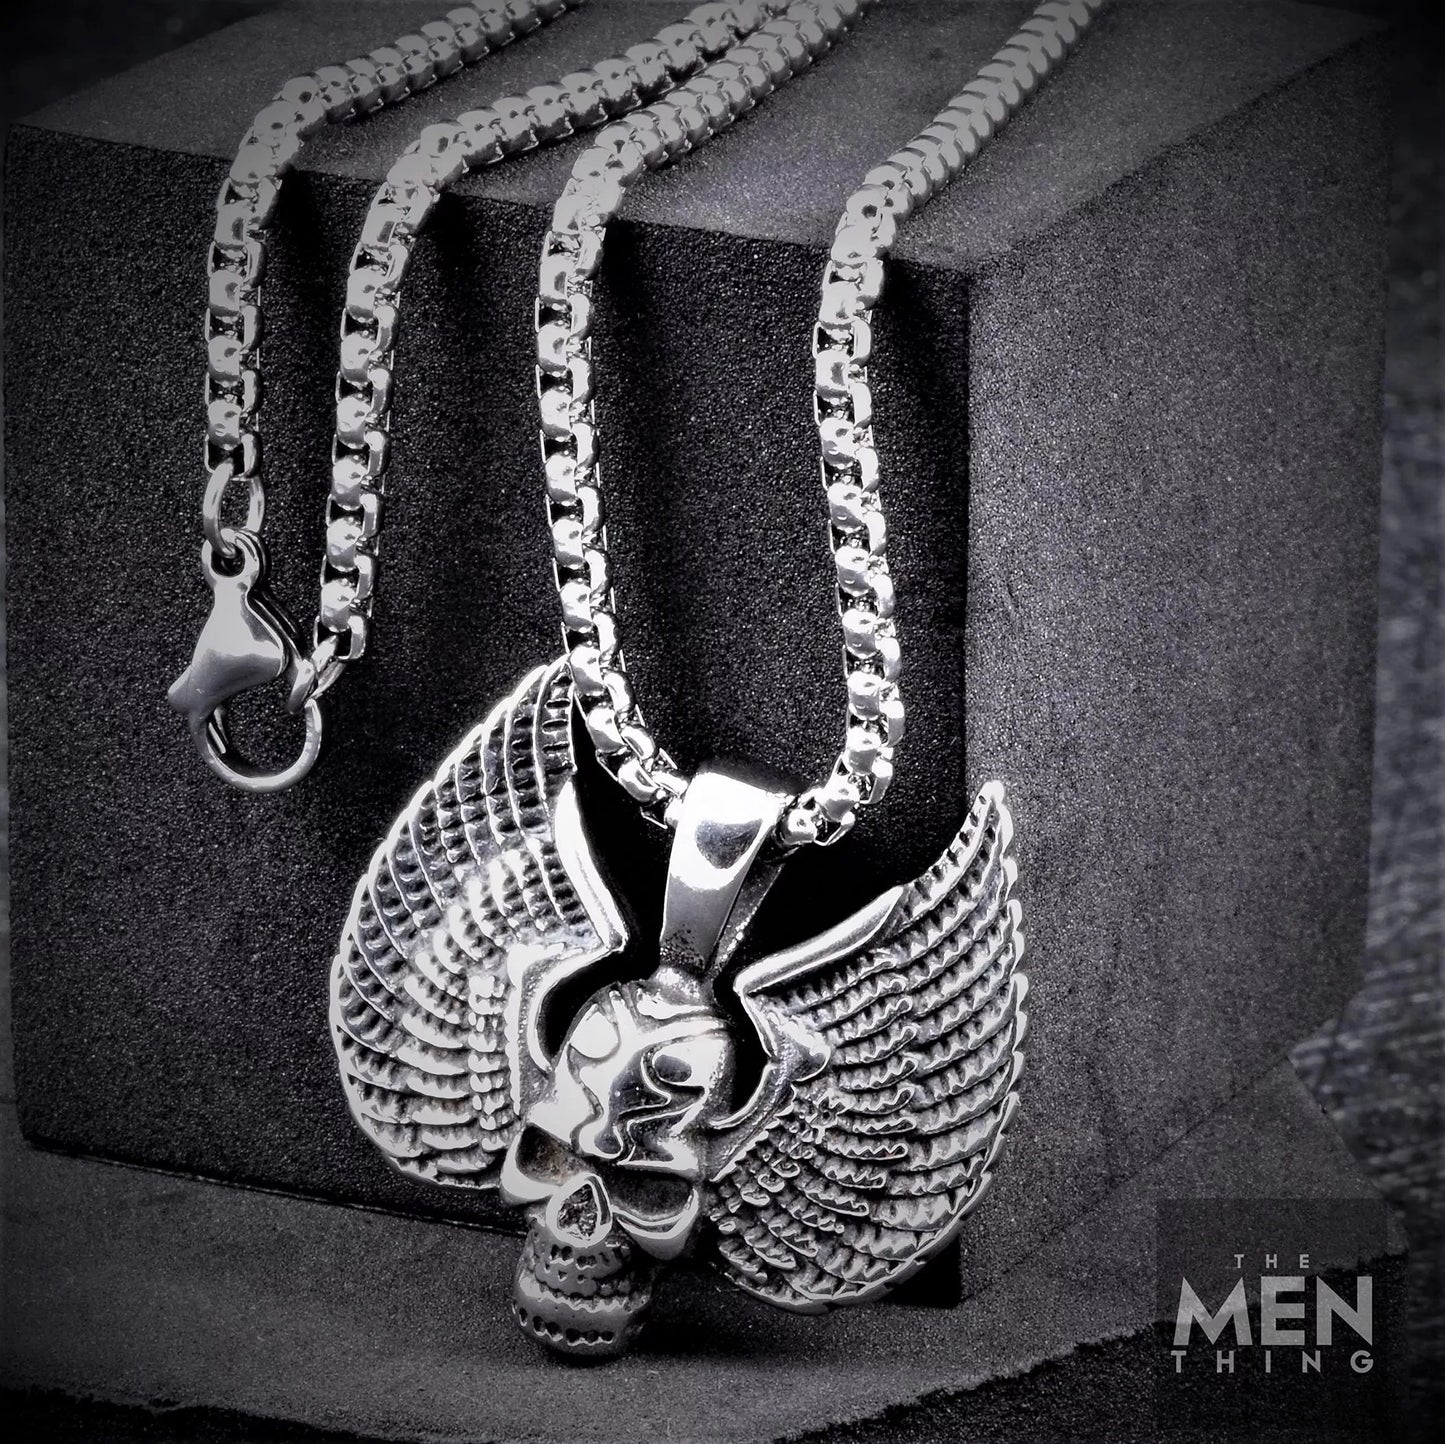 THE MEN THING Pendant for Men - Pure Titanium Steel Wing Skull Pendant with 24inch Round Box Chain for Men & Boys